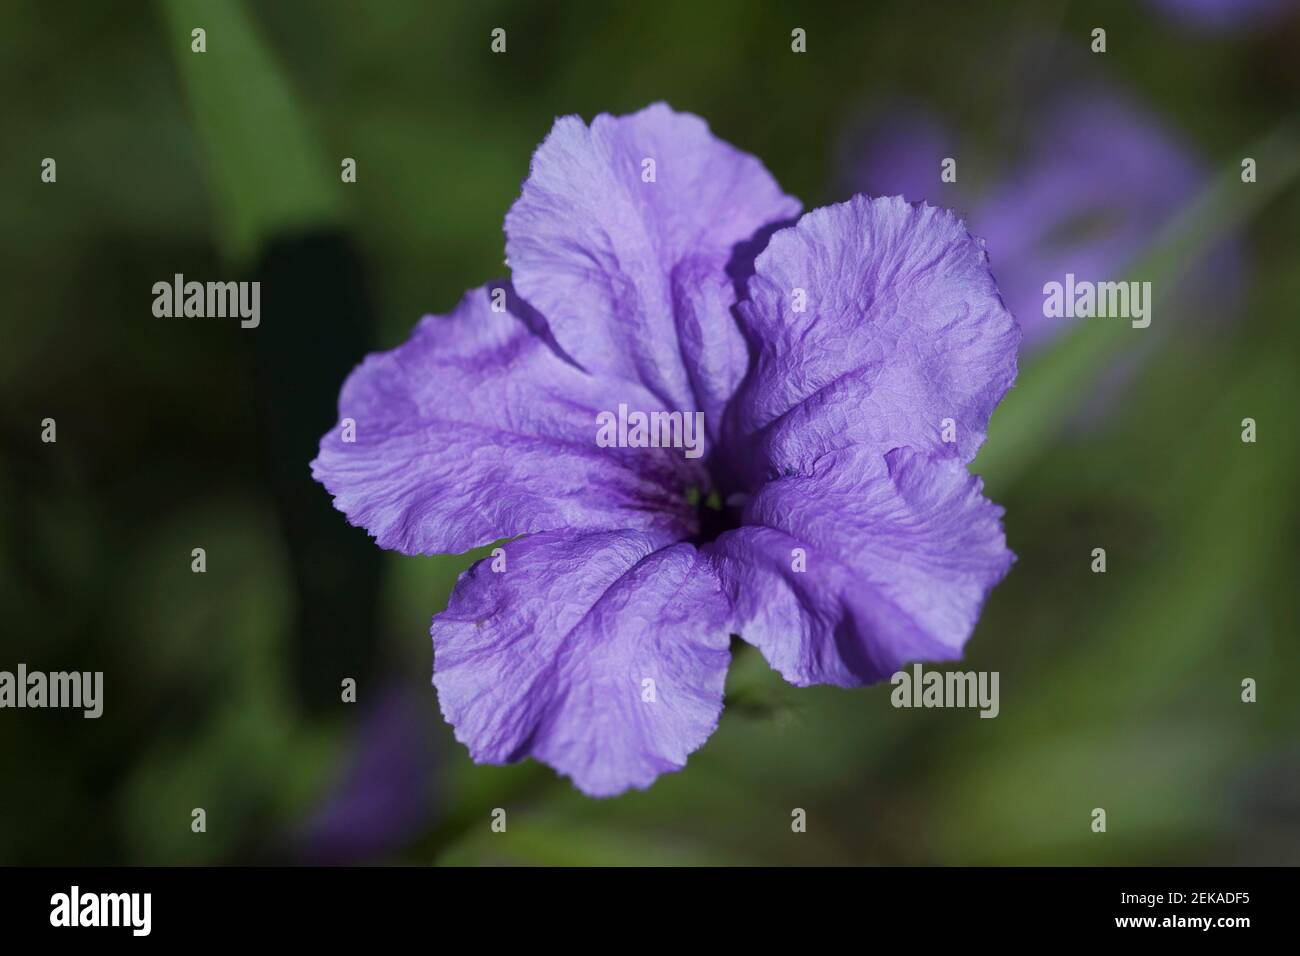 Close up of a Petunia flower Stock Photo